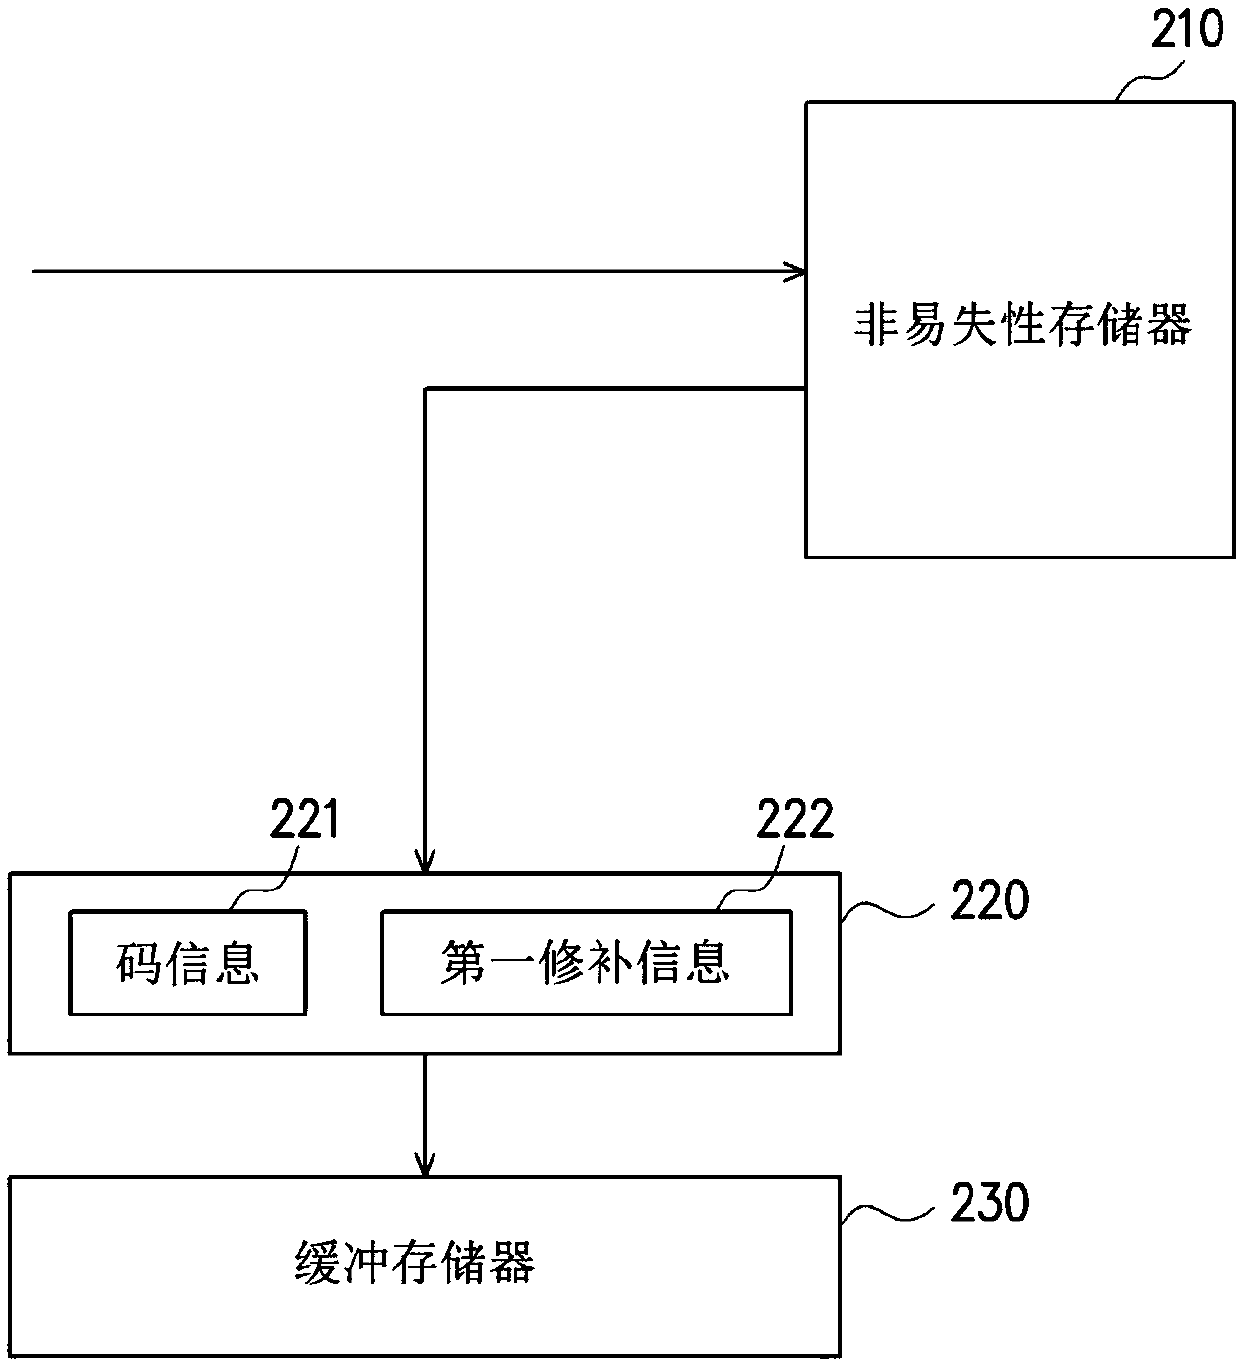 System code management apparatus and management method thereof